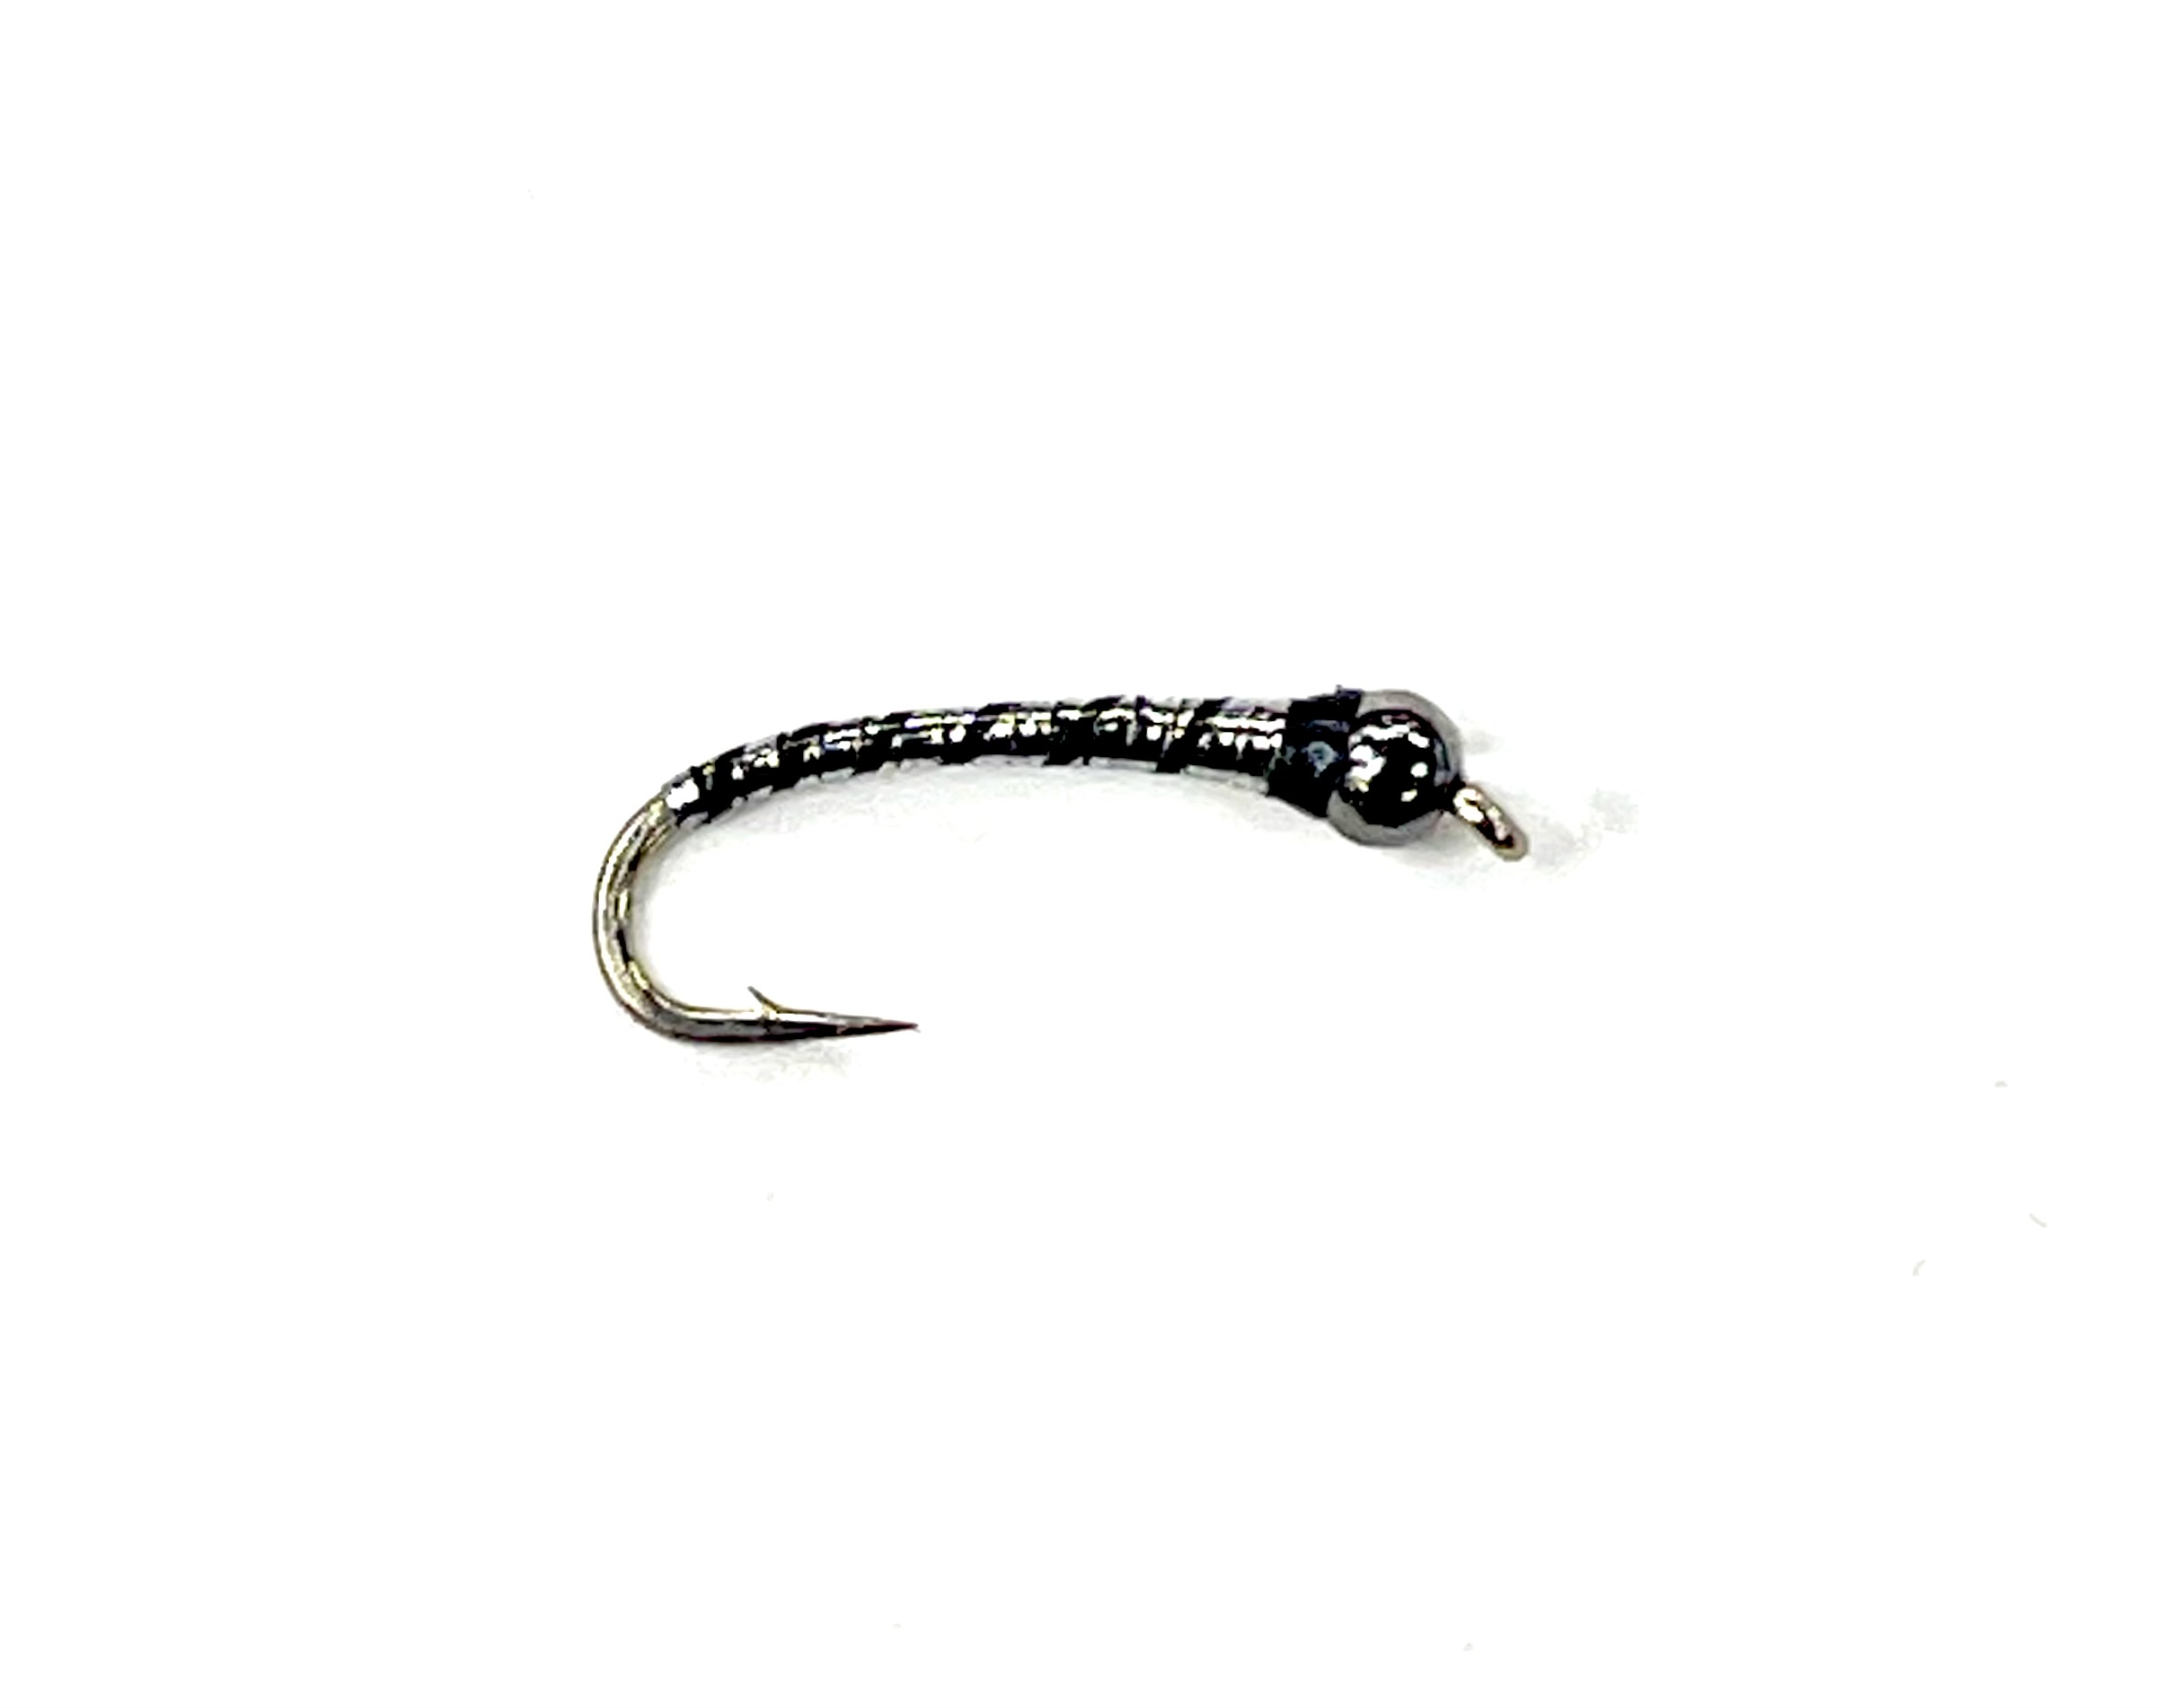 M&Y Static Bag Chironomid - Size 16